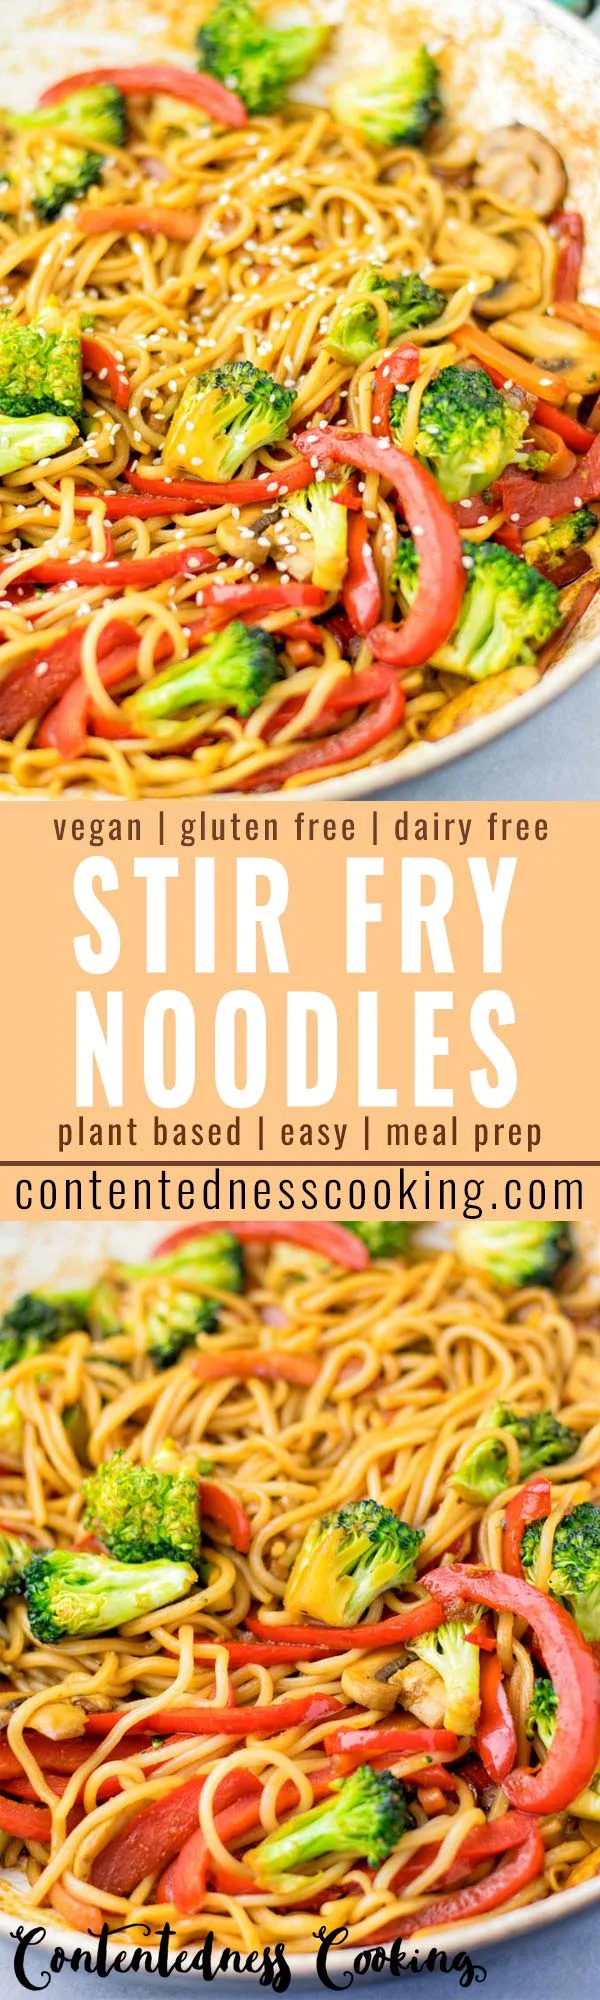 These Stir Fry Noodles are made with a homemade stir fry sauce and done in no time. It is a one pot meal, which is naturally vegan, gluten free and so delicious that the whole family will love it. #vegan #dairyfree #glutenfree #vegetarian #onepotmeals #contentednesscooking #dinner #lunch #mealprep #stirfrynoodles